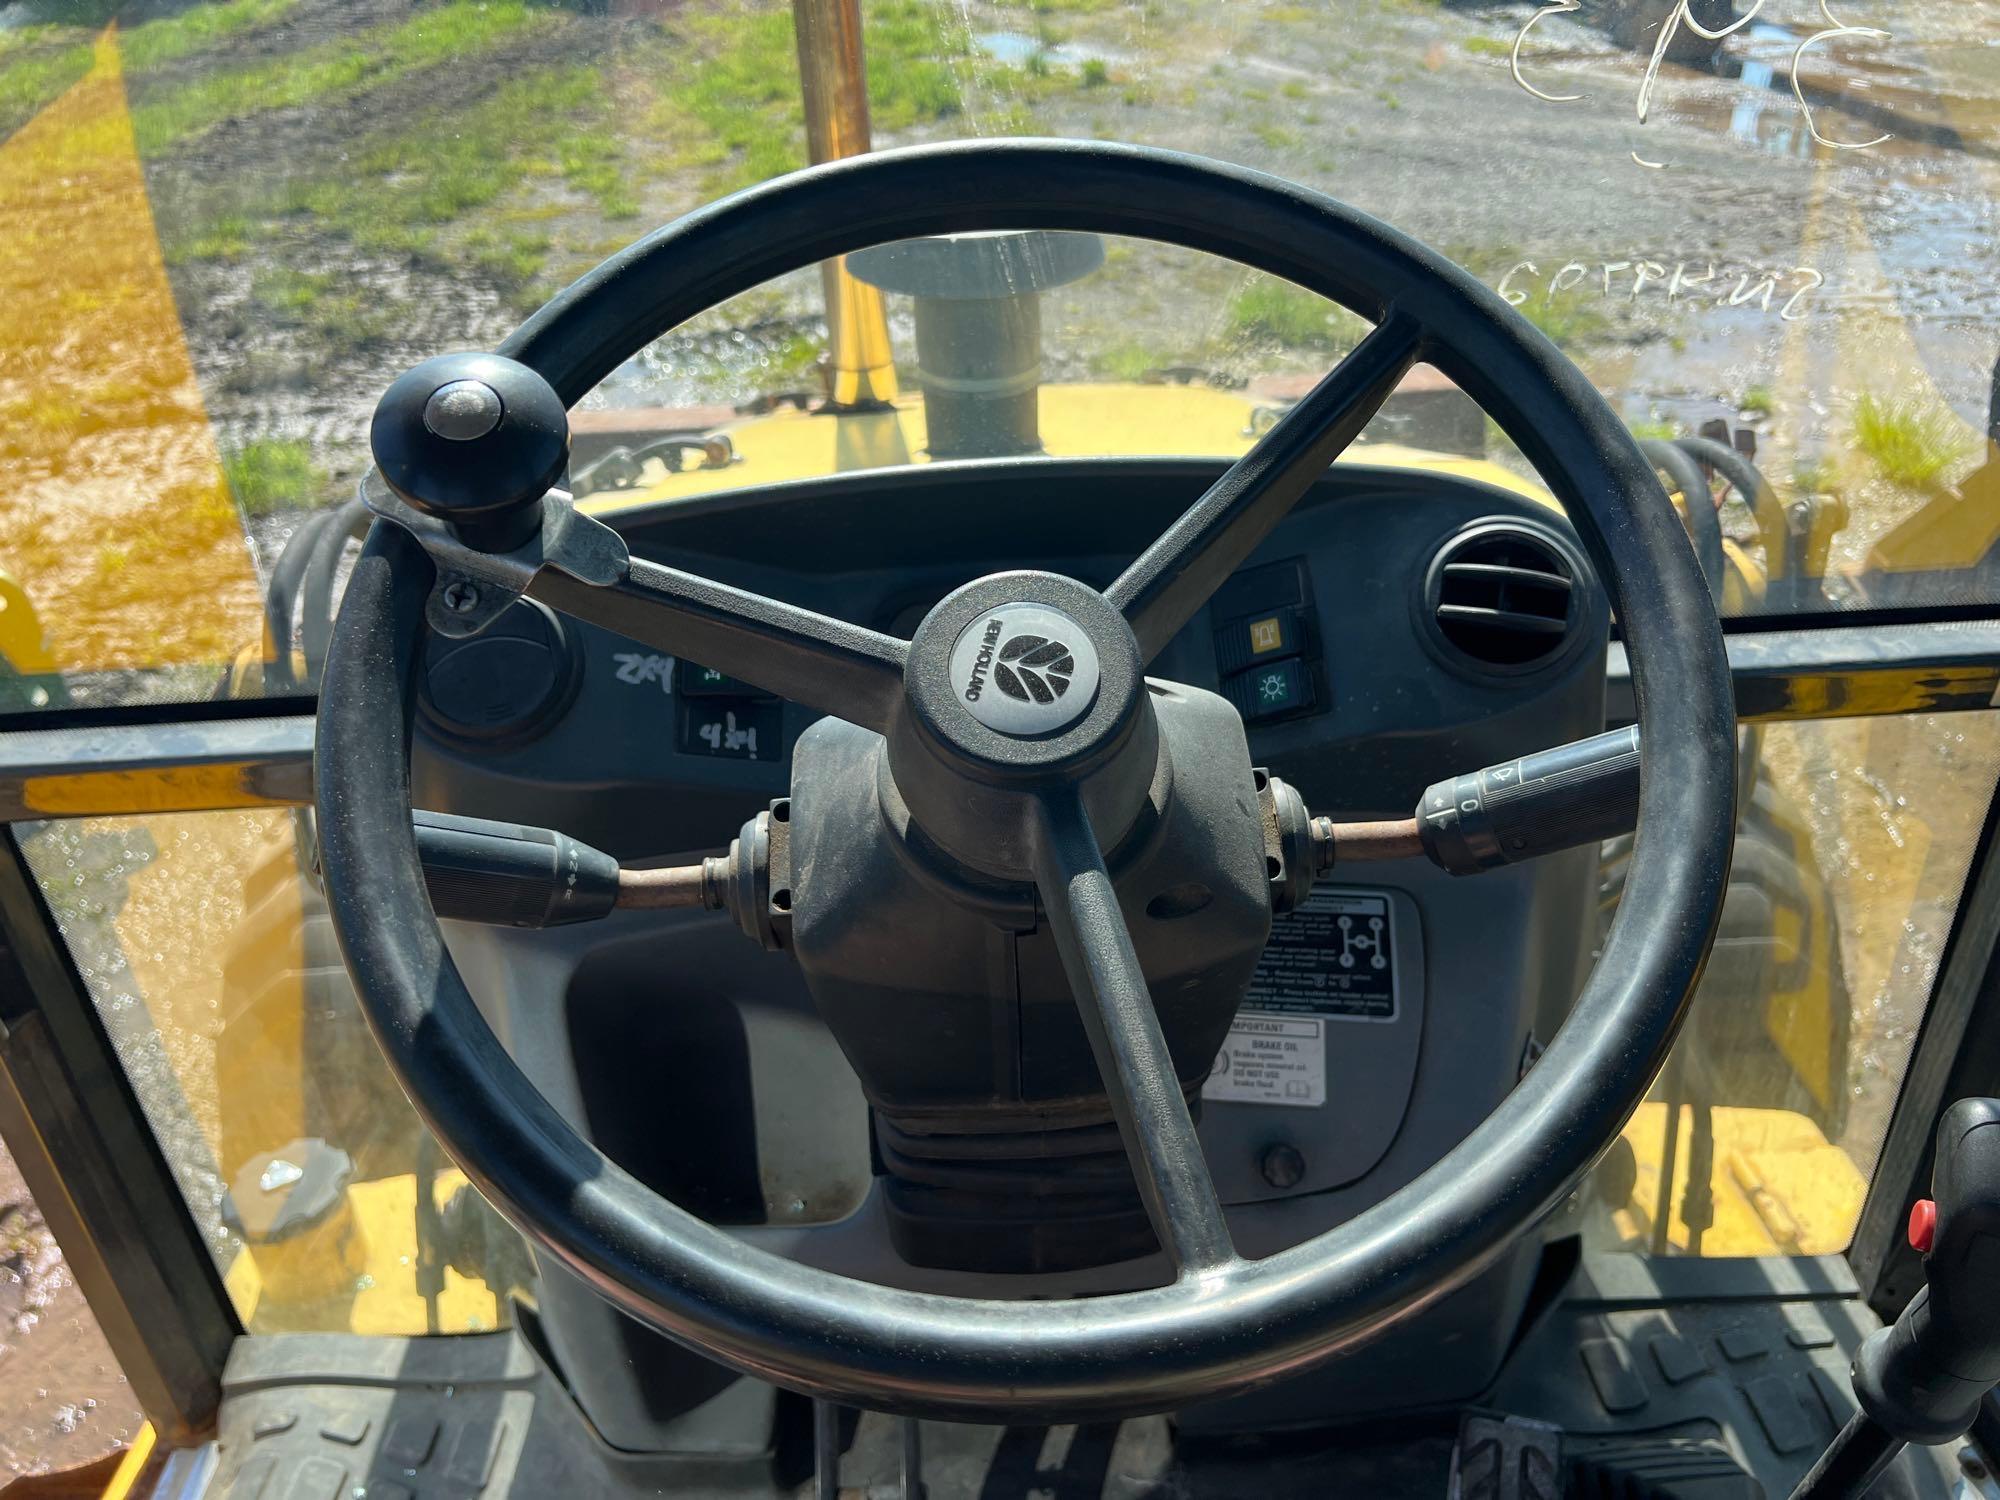 NEW HOLLAND LB75 TRACTOR LOADER BACKHOE SN:031049792 4x4, powered by diesel engine, equipped with